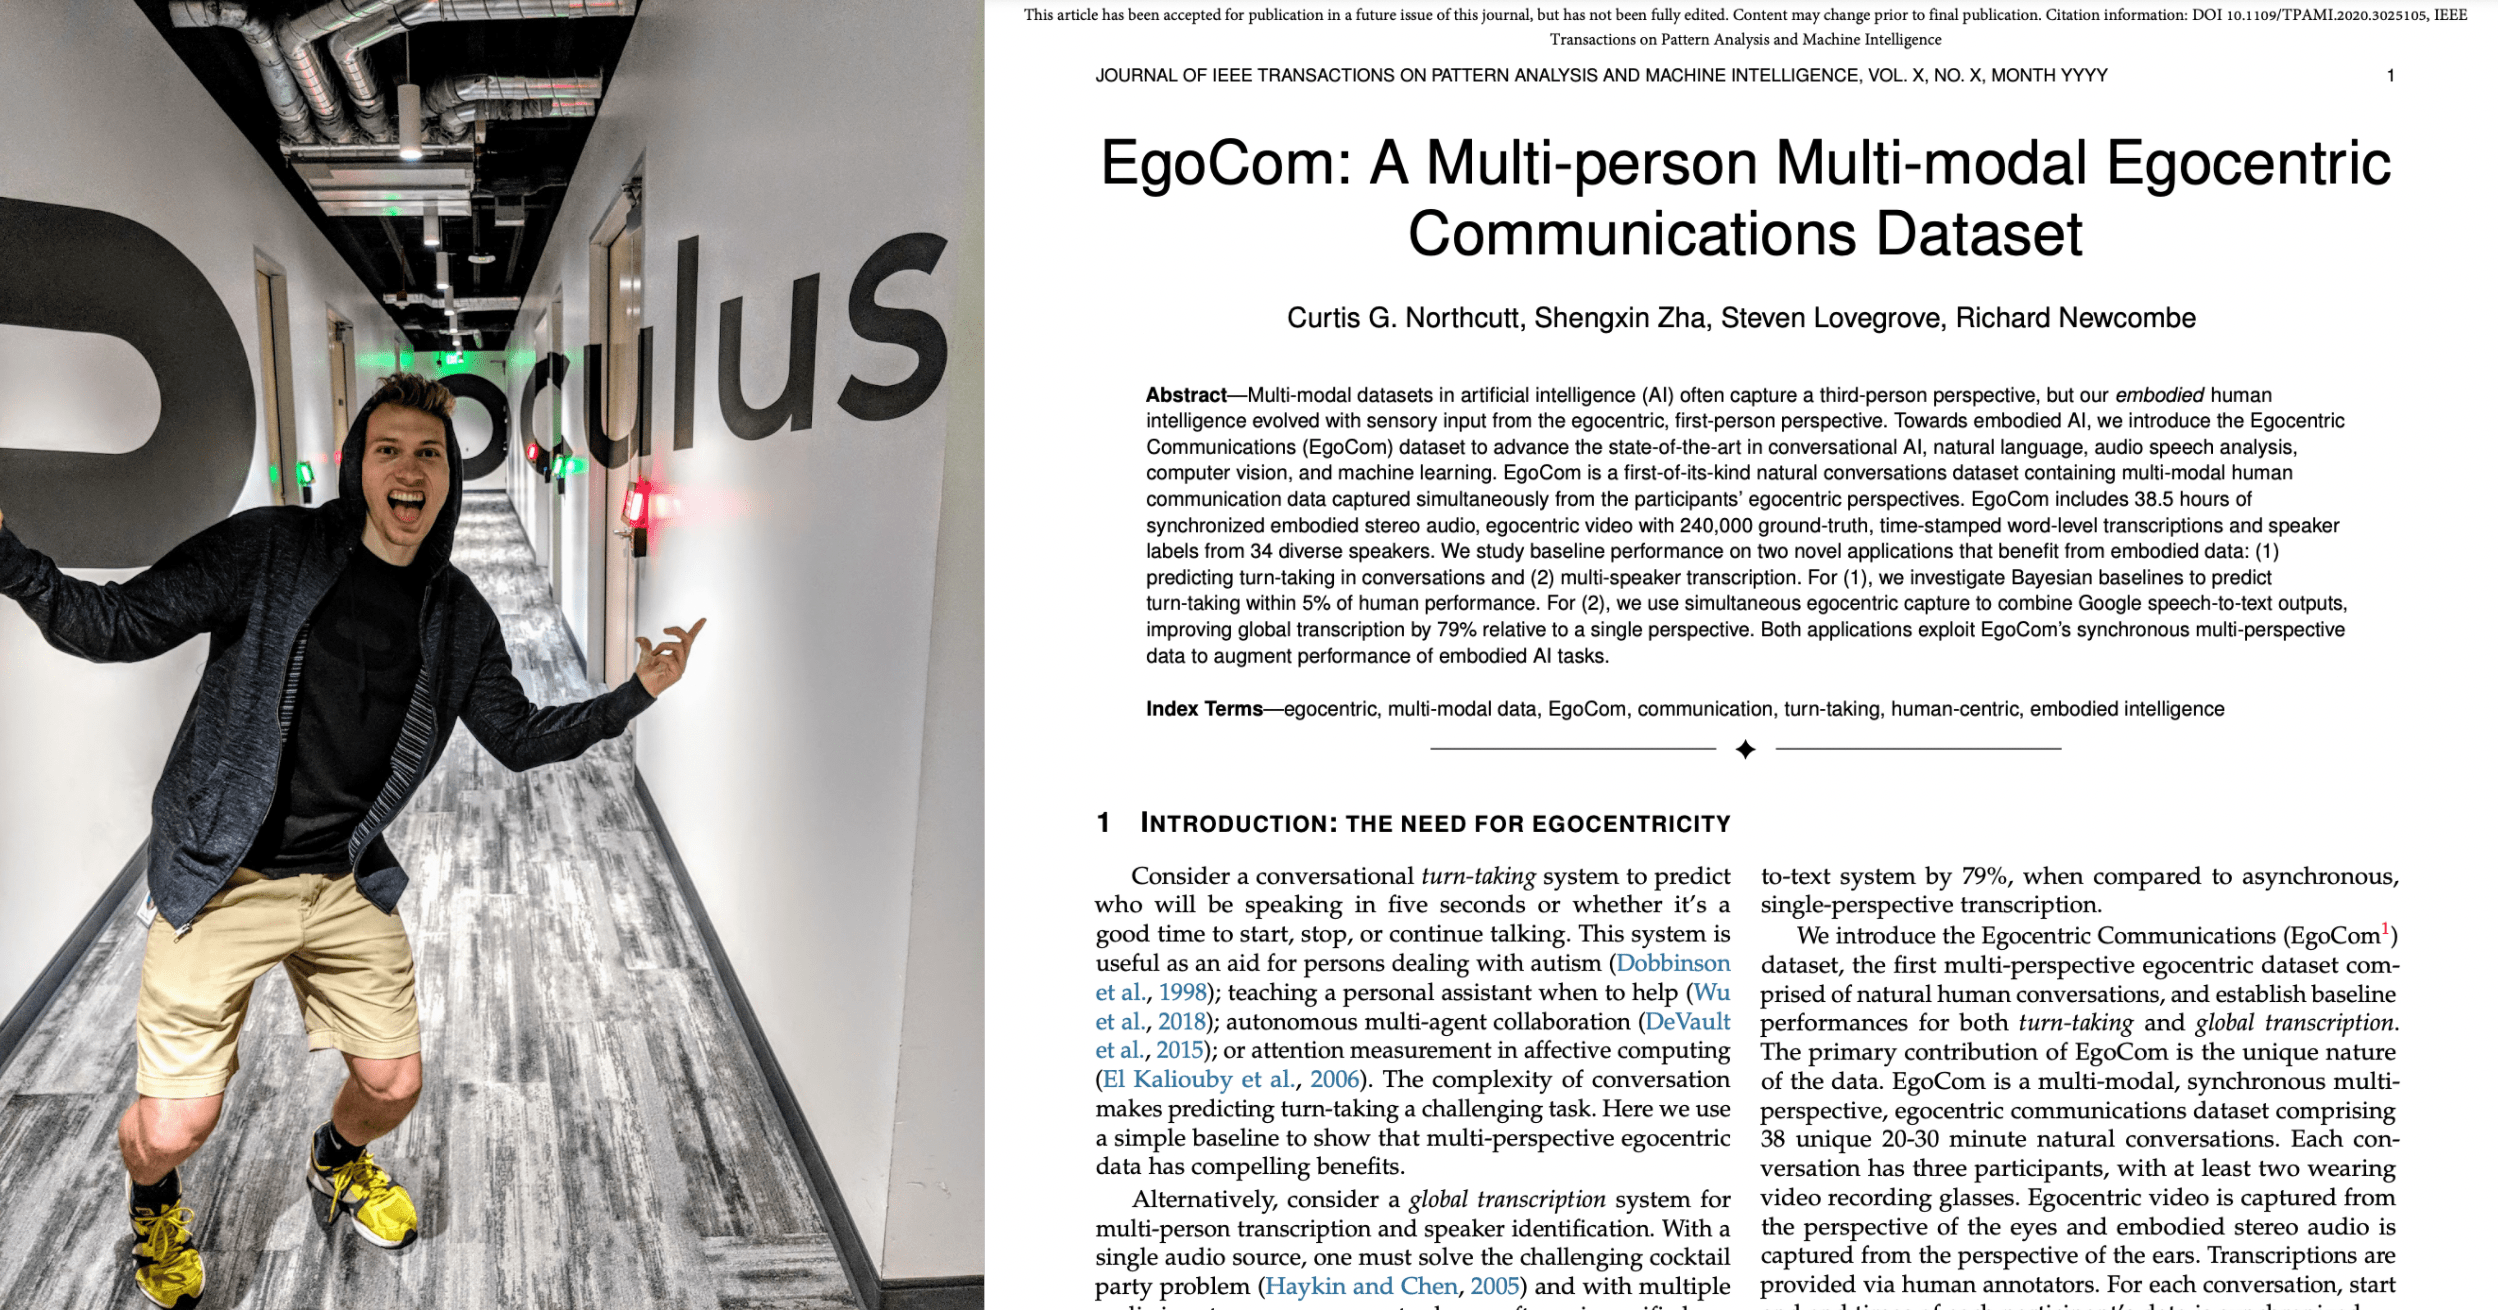 Curtis in the Oculus Research office in 2018 (LEFT). A screenshot of one Curtis's publication on creating multi-modal datasets published in IEEE T-PAMI (RIGHT).